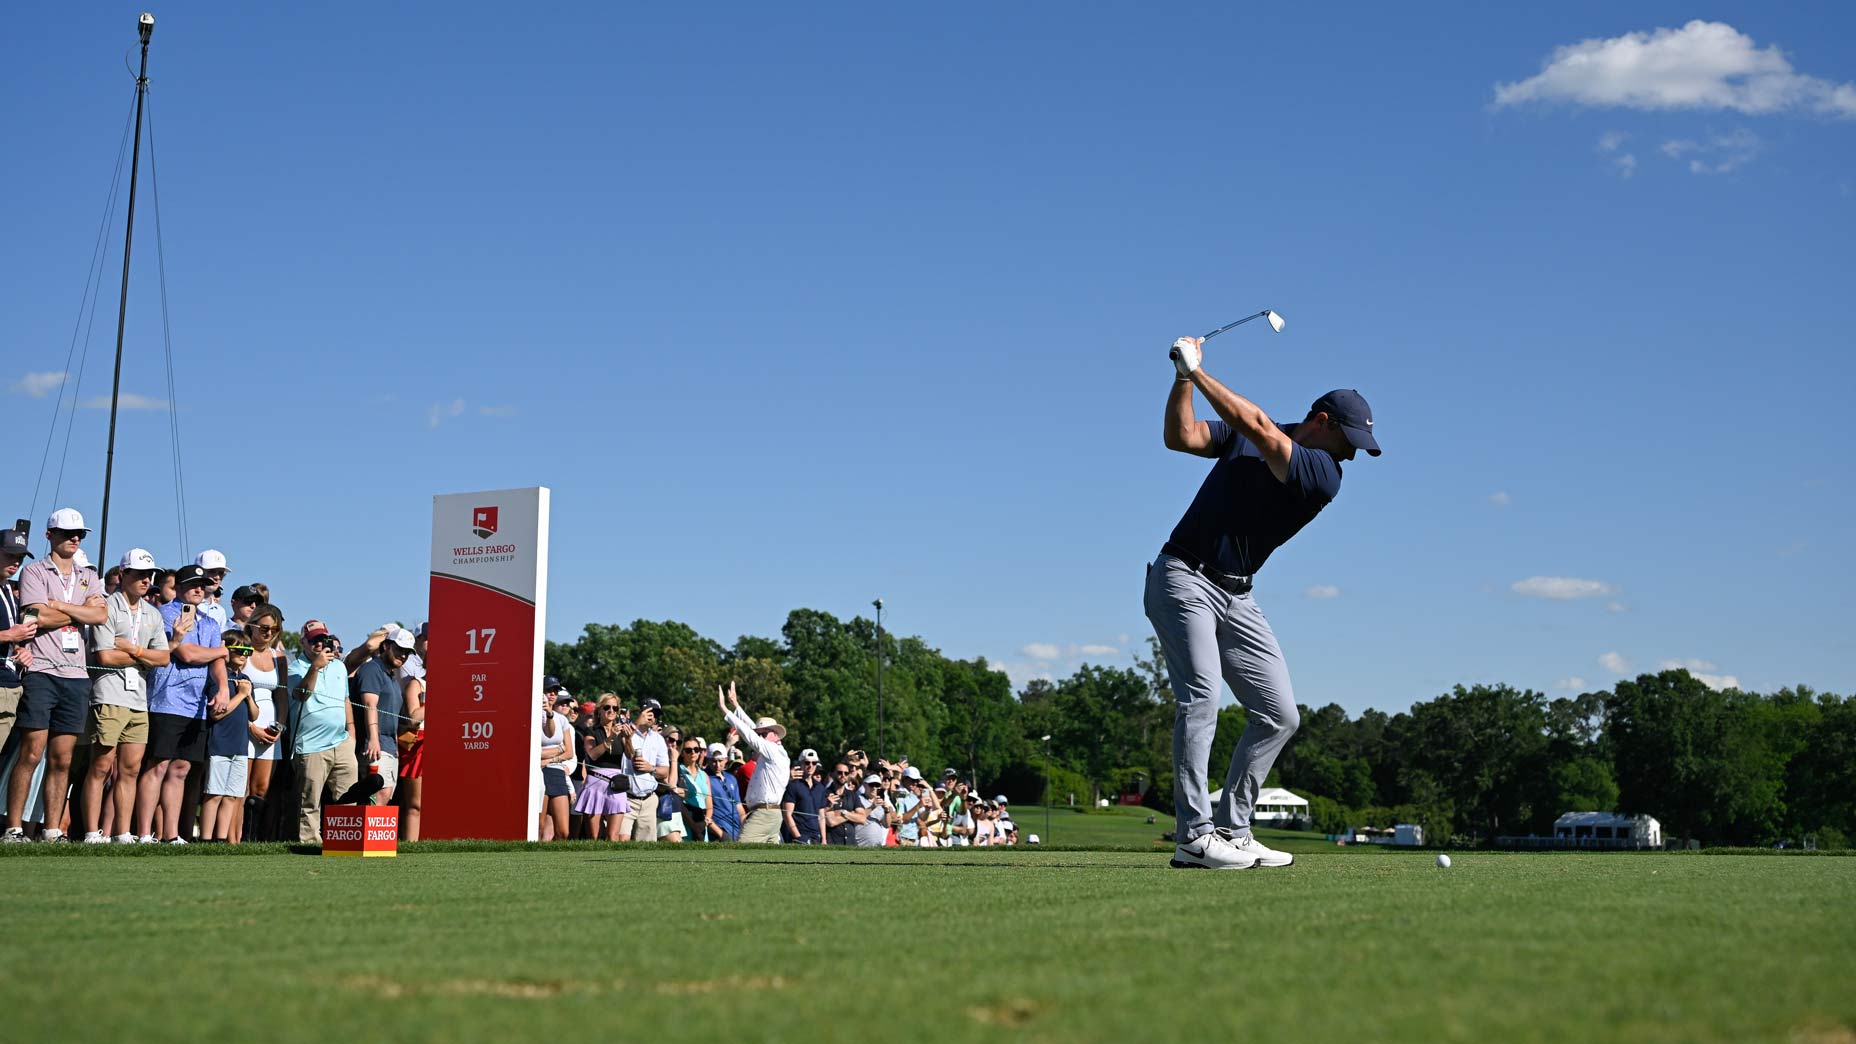 Rory McIlroy hits a shot at the Wells Fargo Championship.